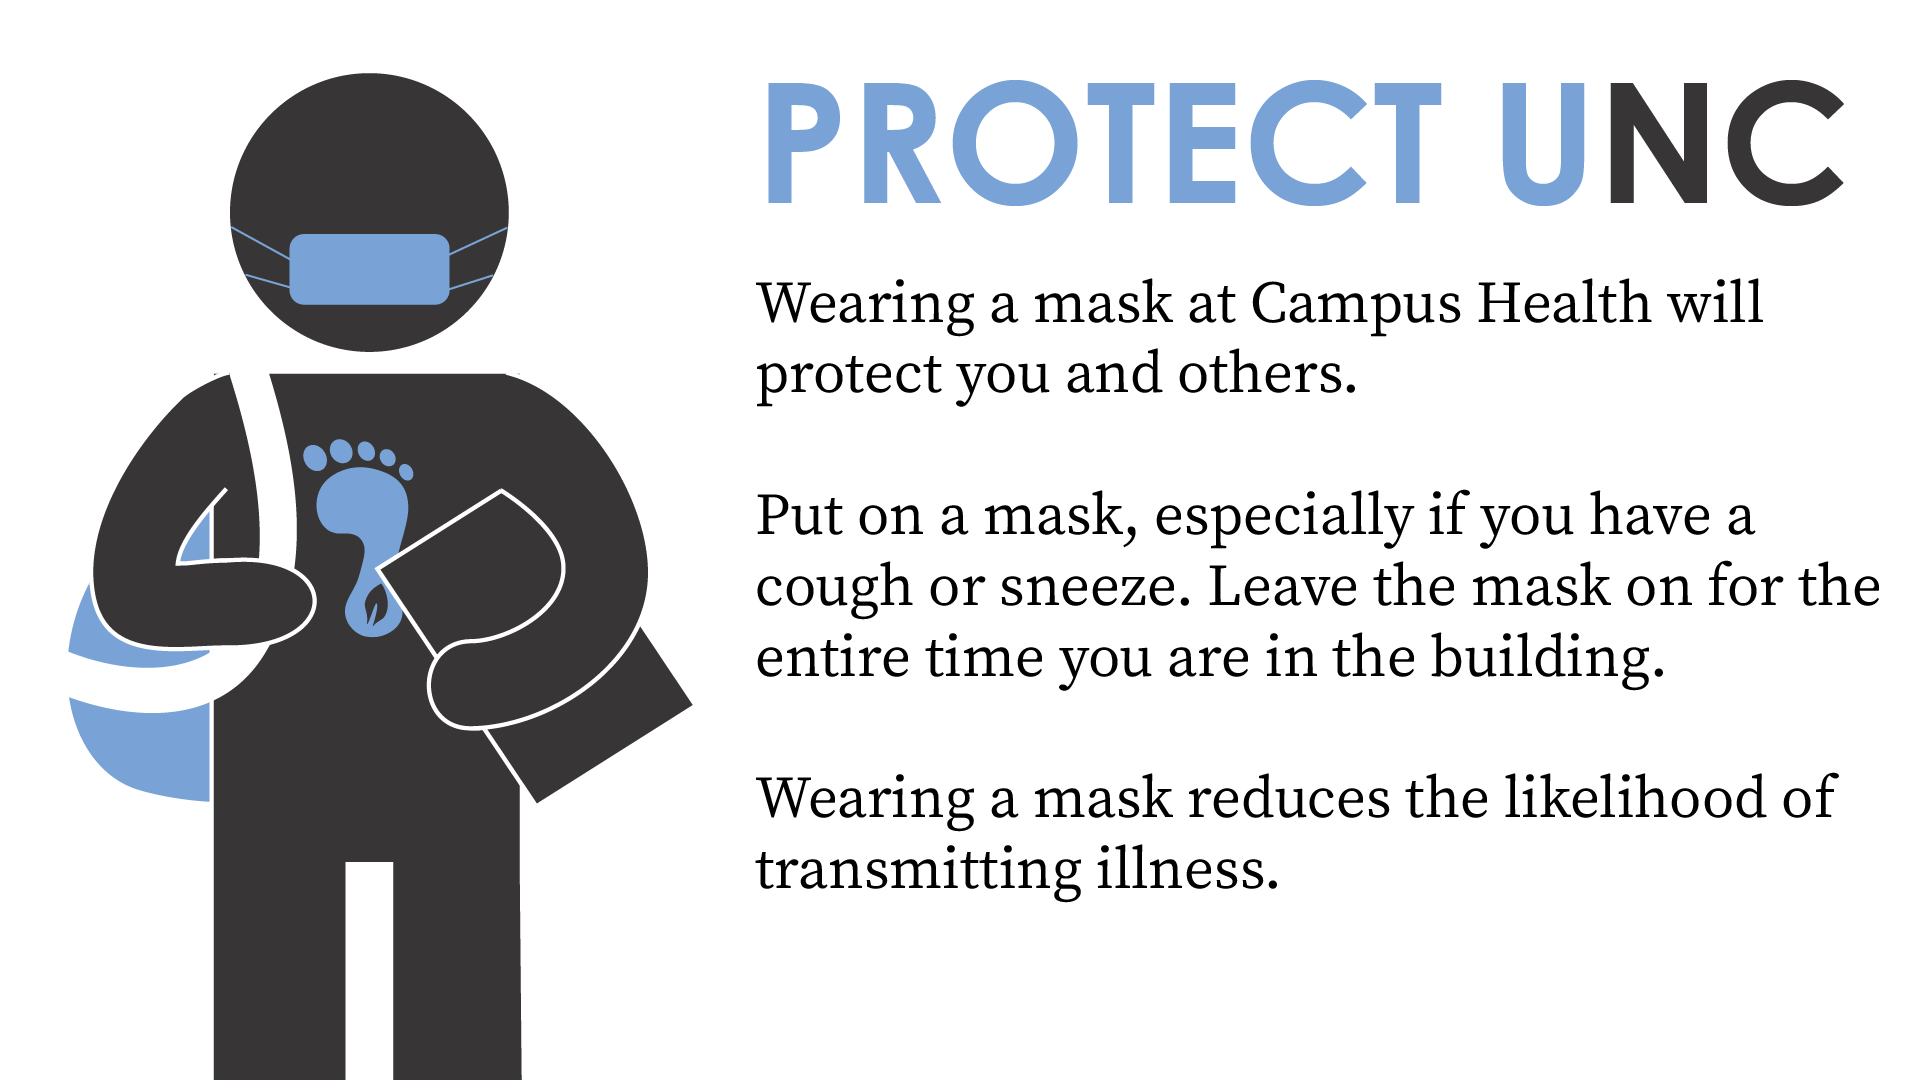 Protect UNC by wearing a mask at Campus Health